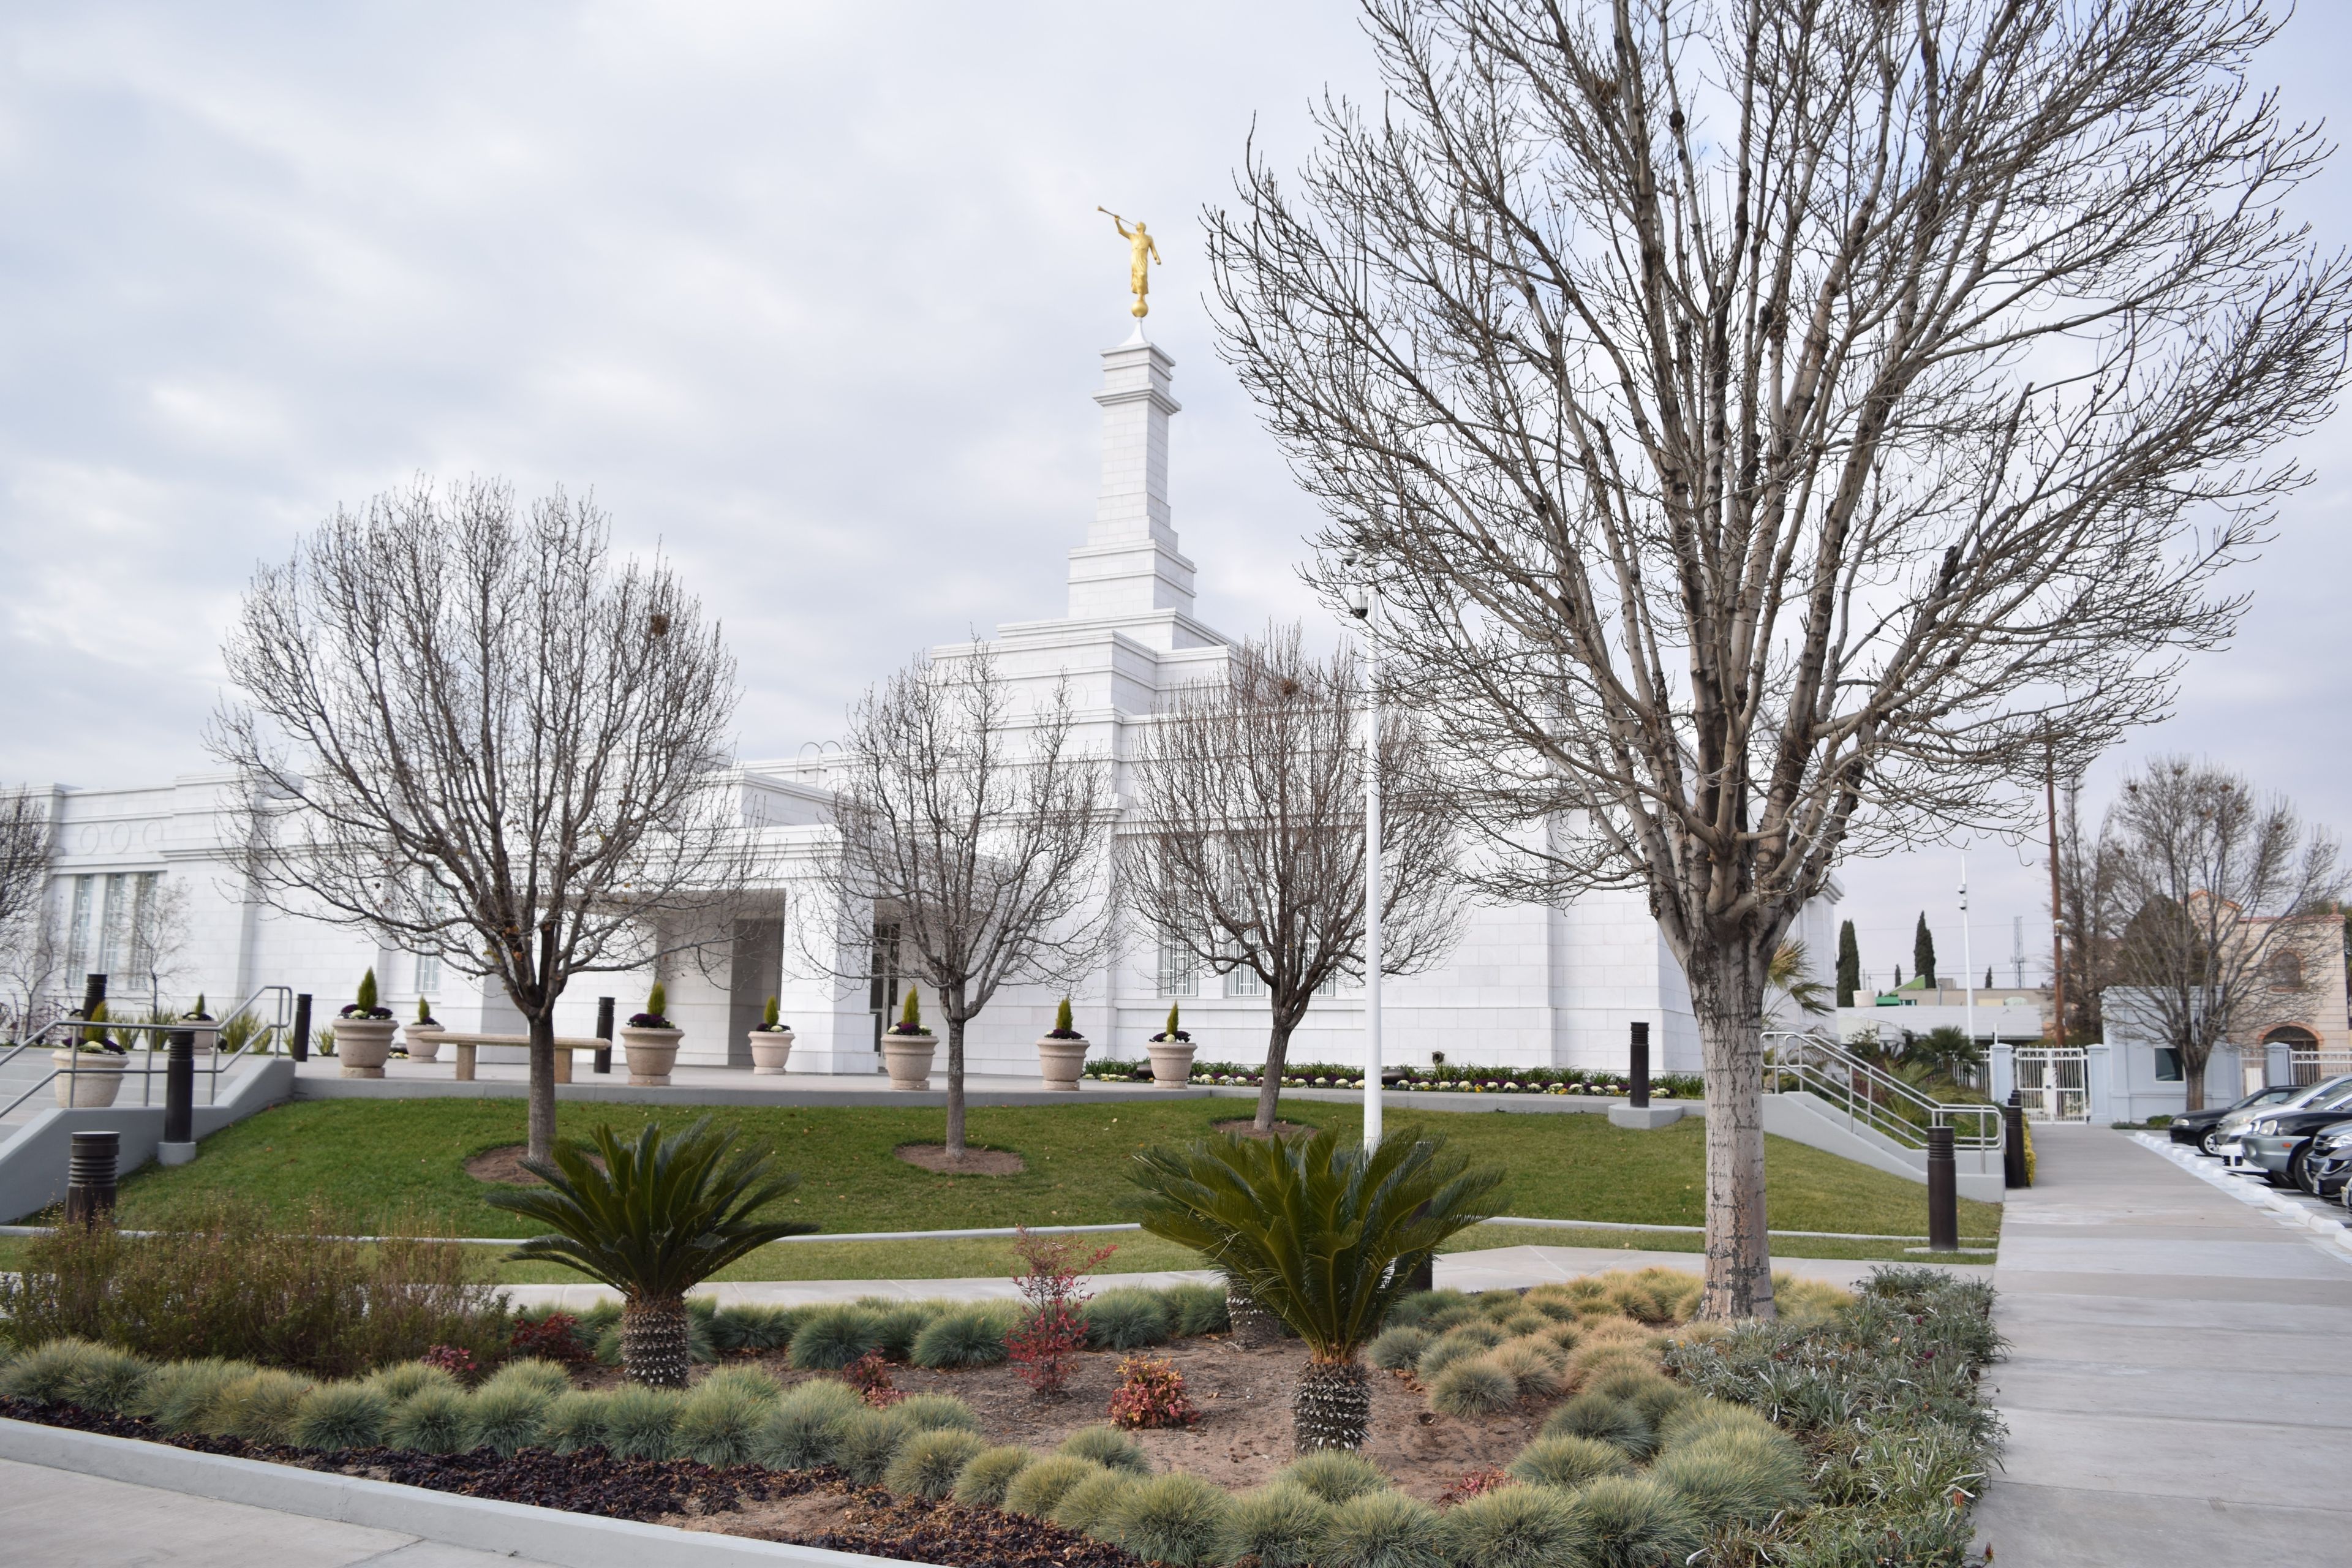 An exterior view of the Ciudad Juárez Mexico Temple with scenery.